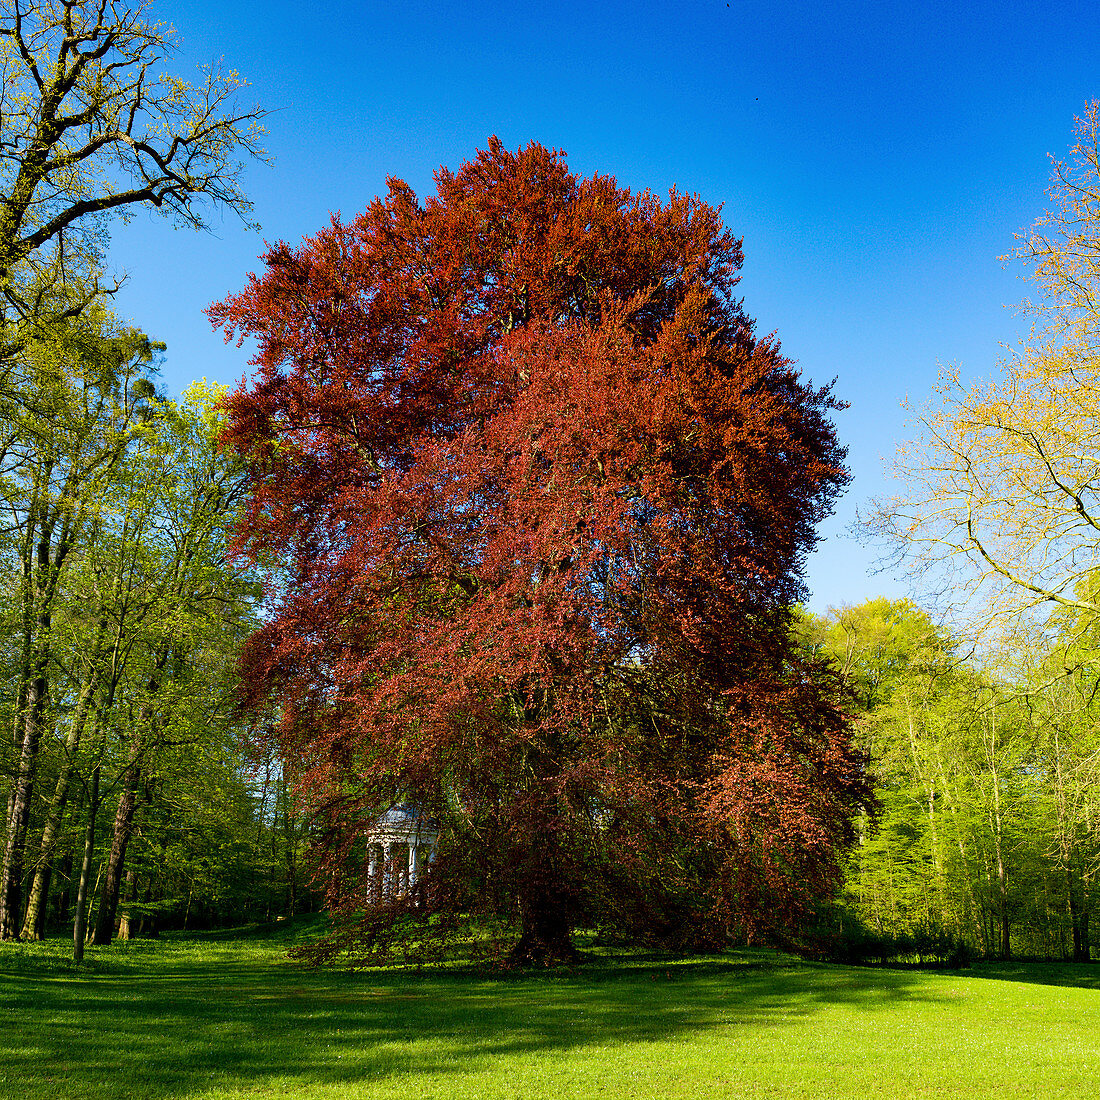 Acer rubrum in the park